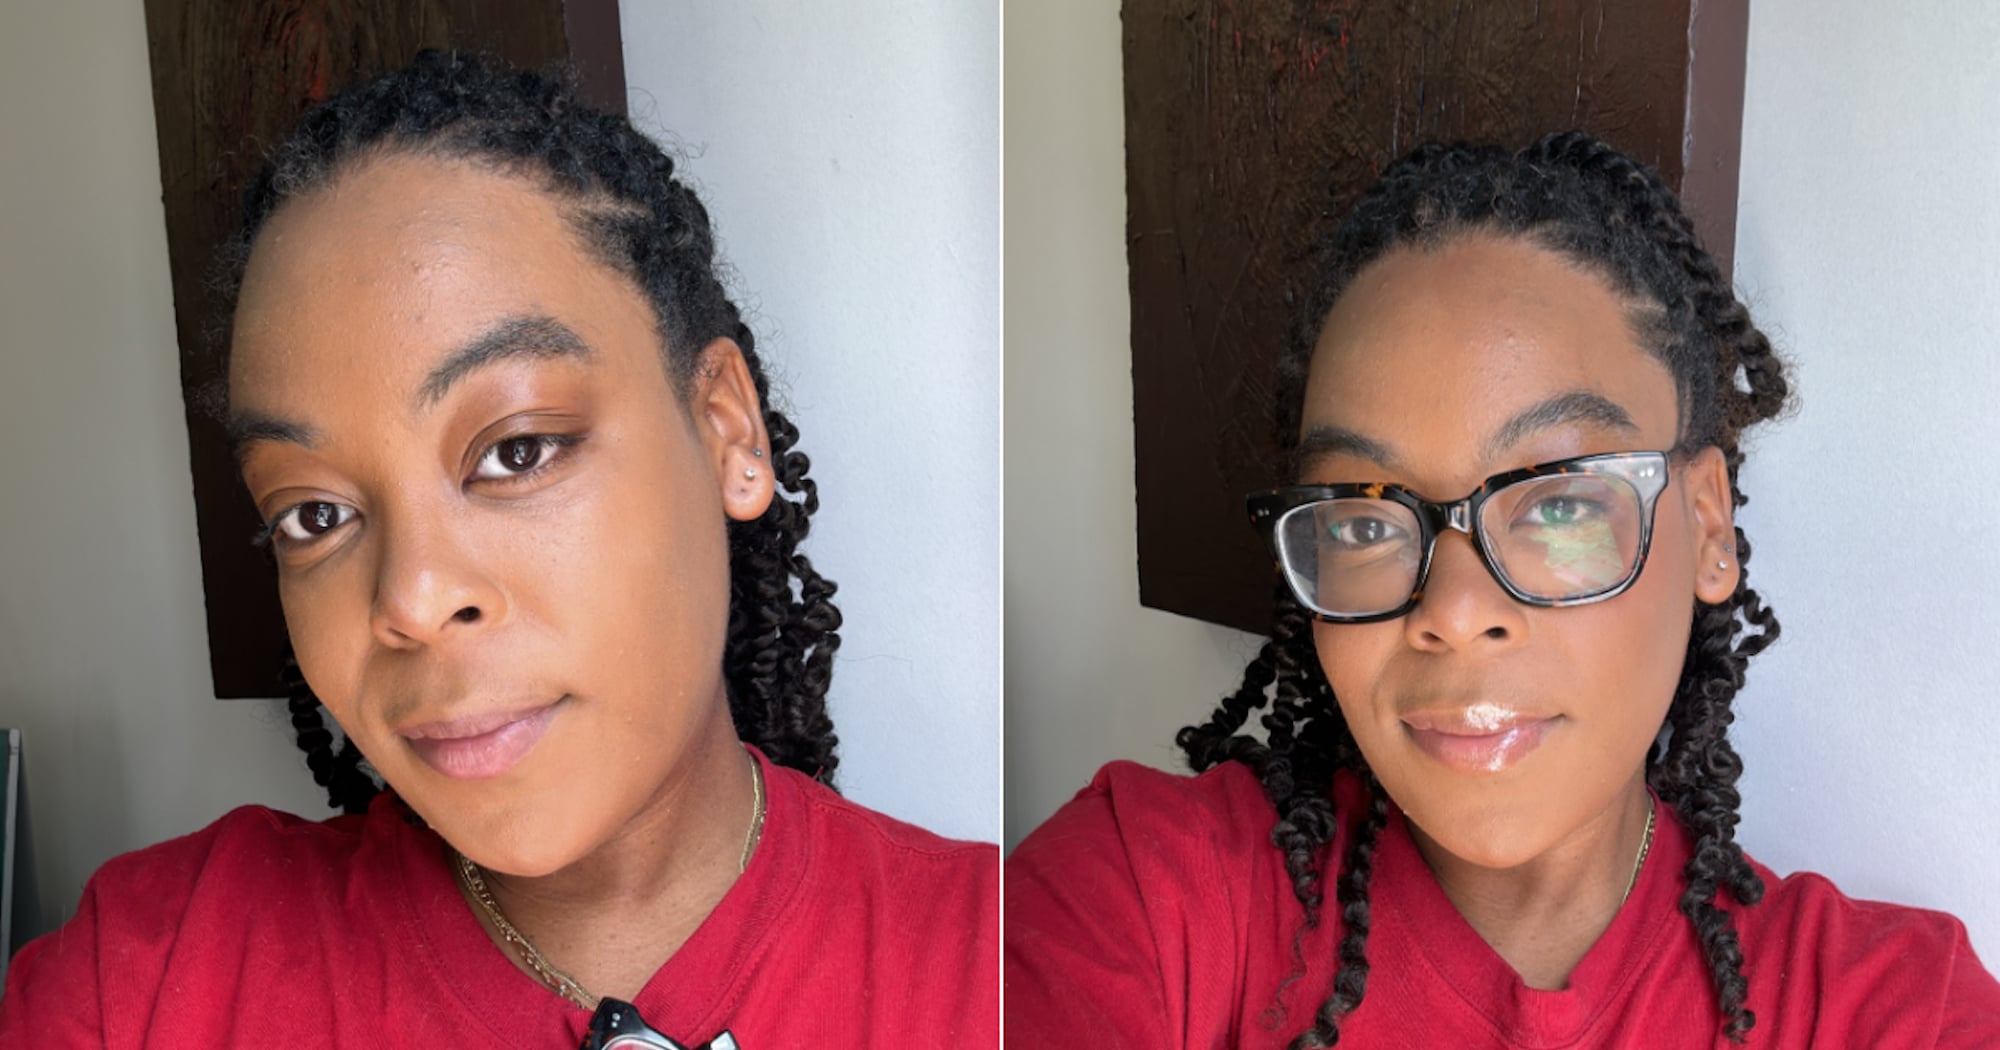 I Tried TikTok’s White Foundation Hack For an Instant “Filter”